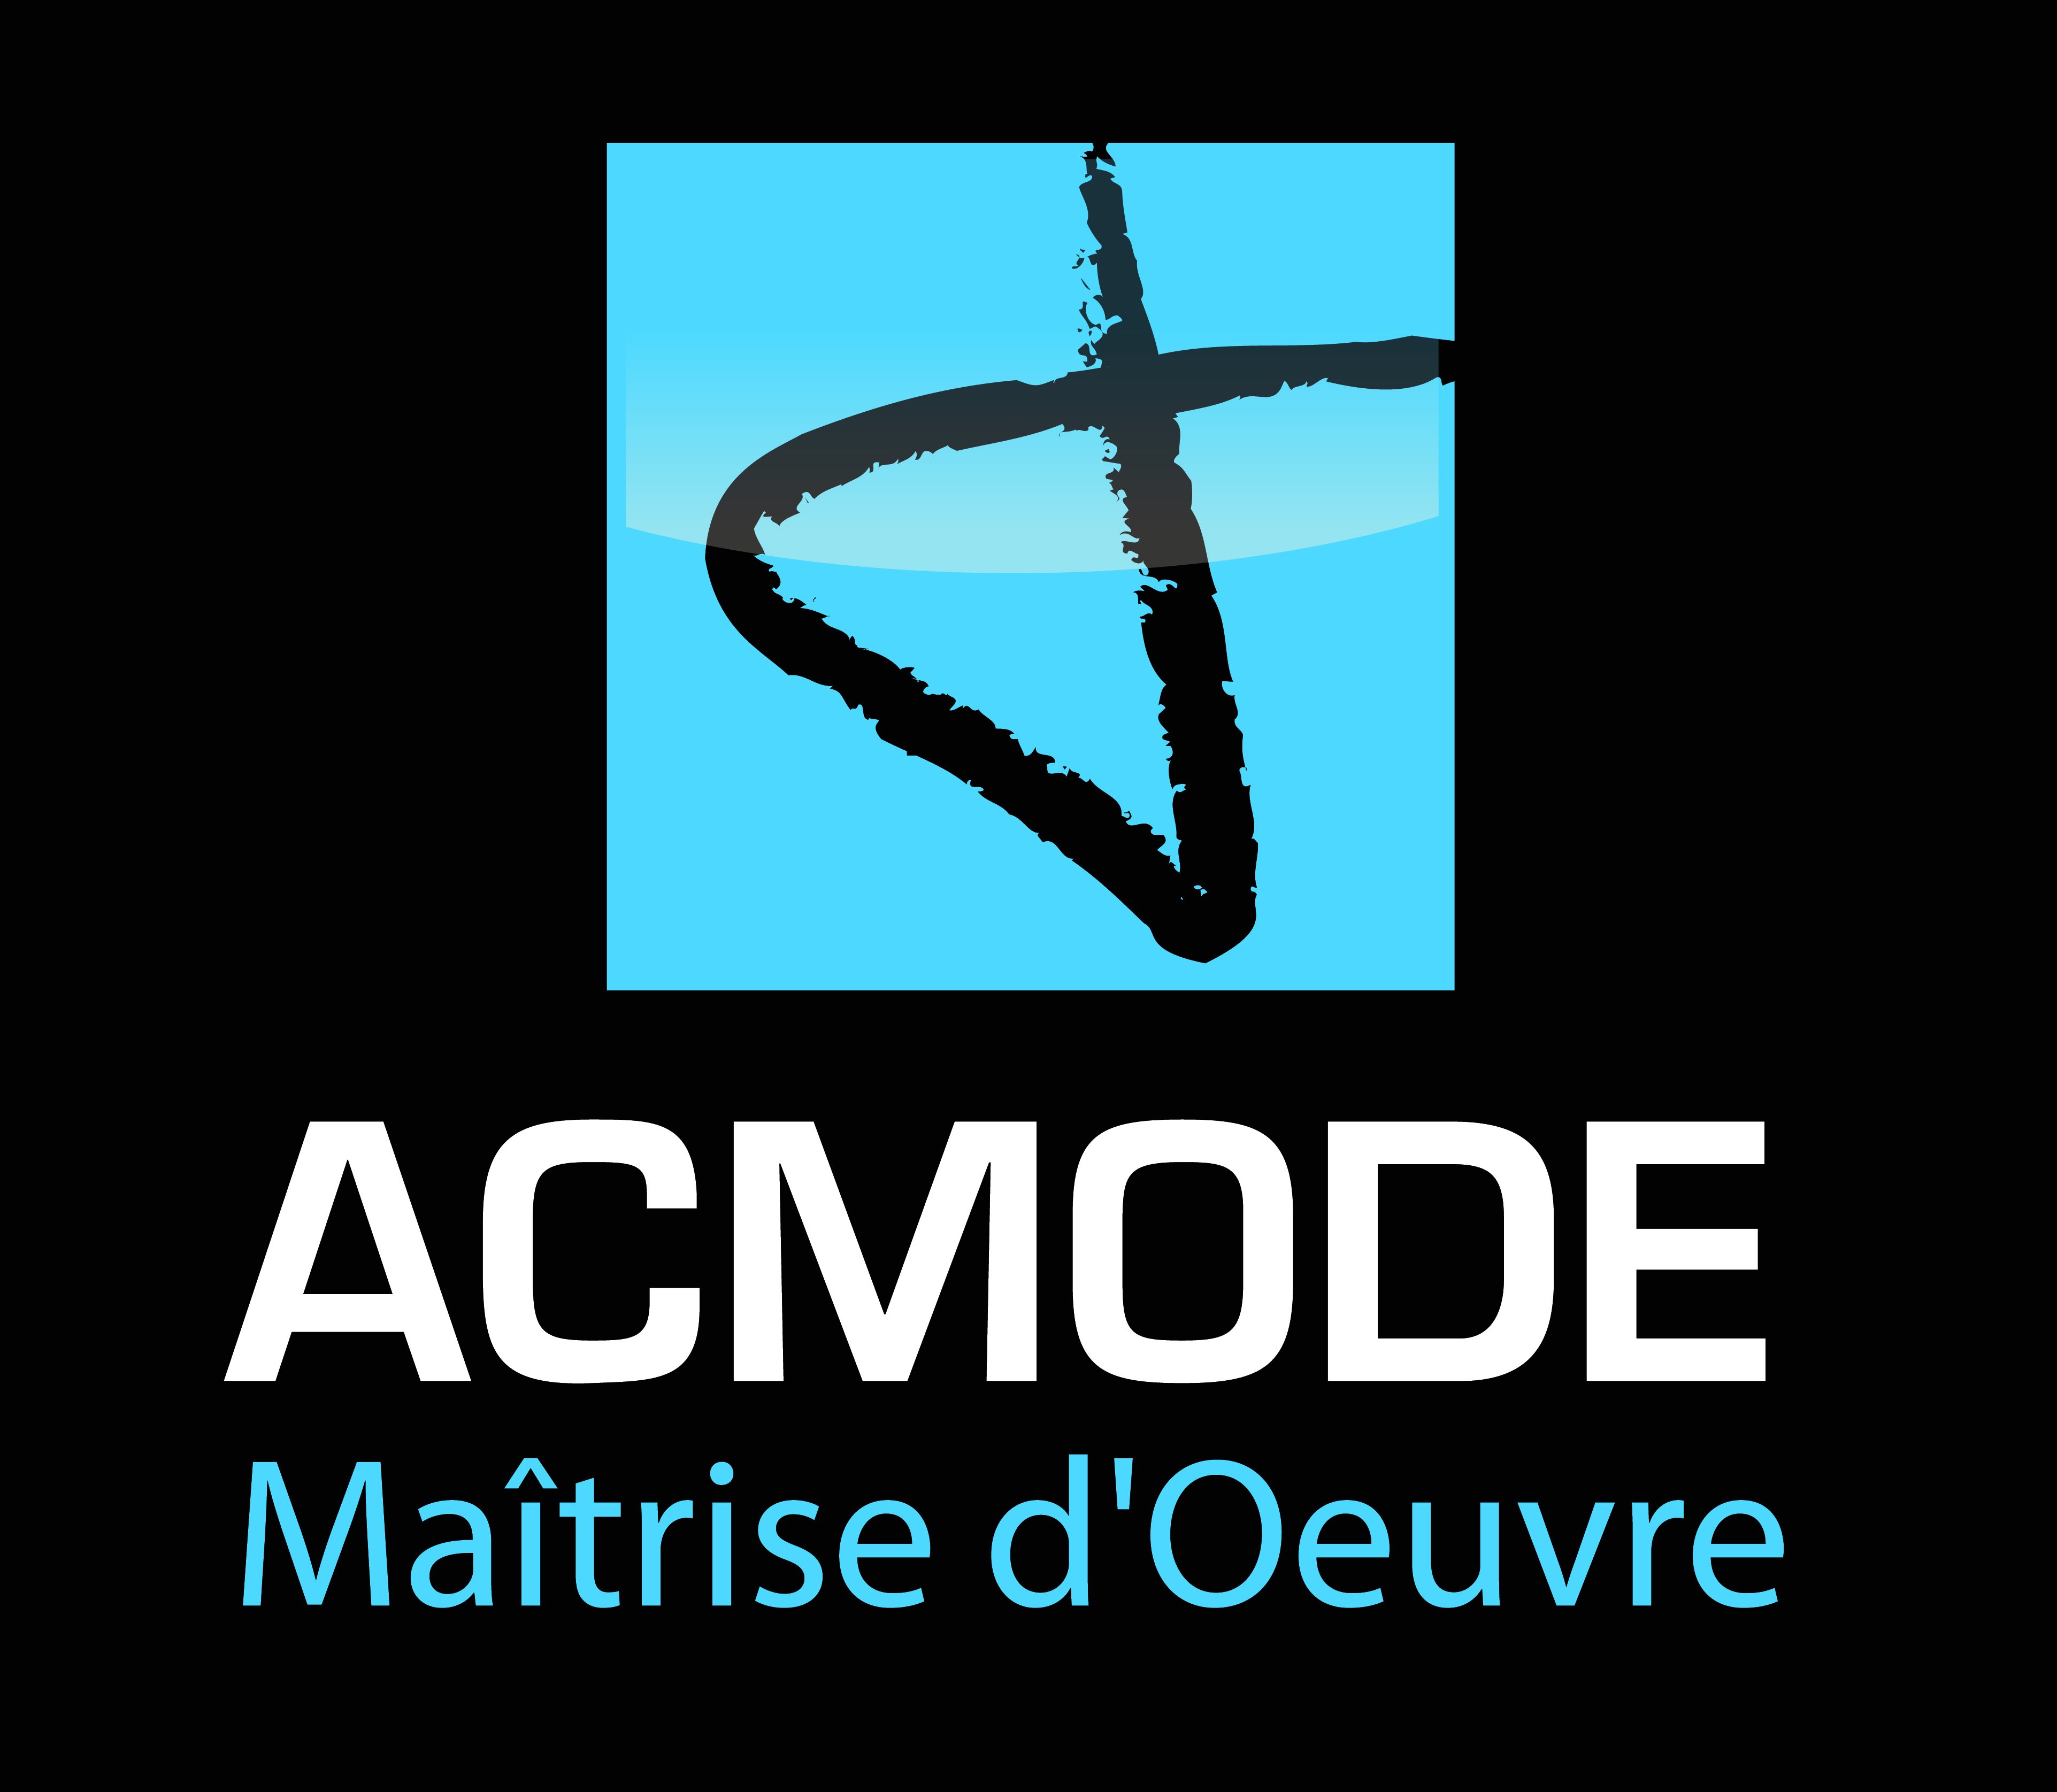 ACMODE